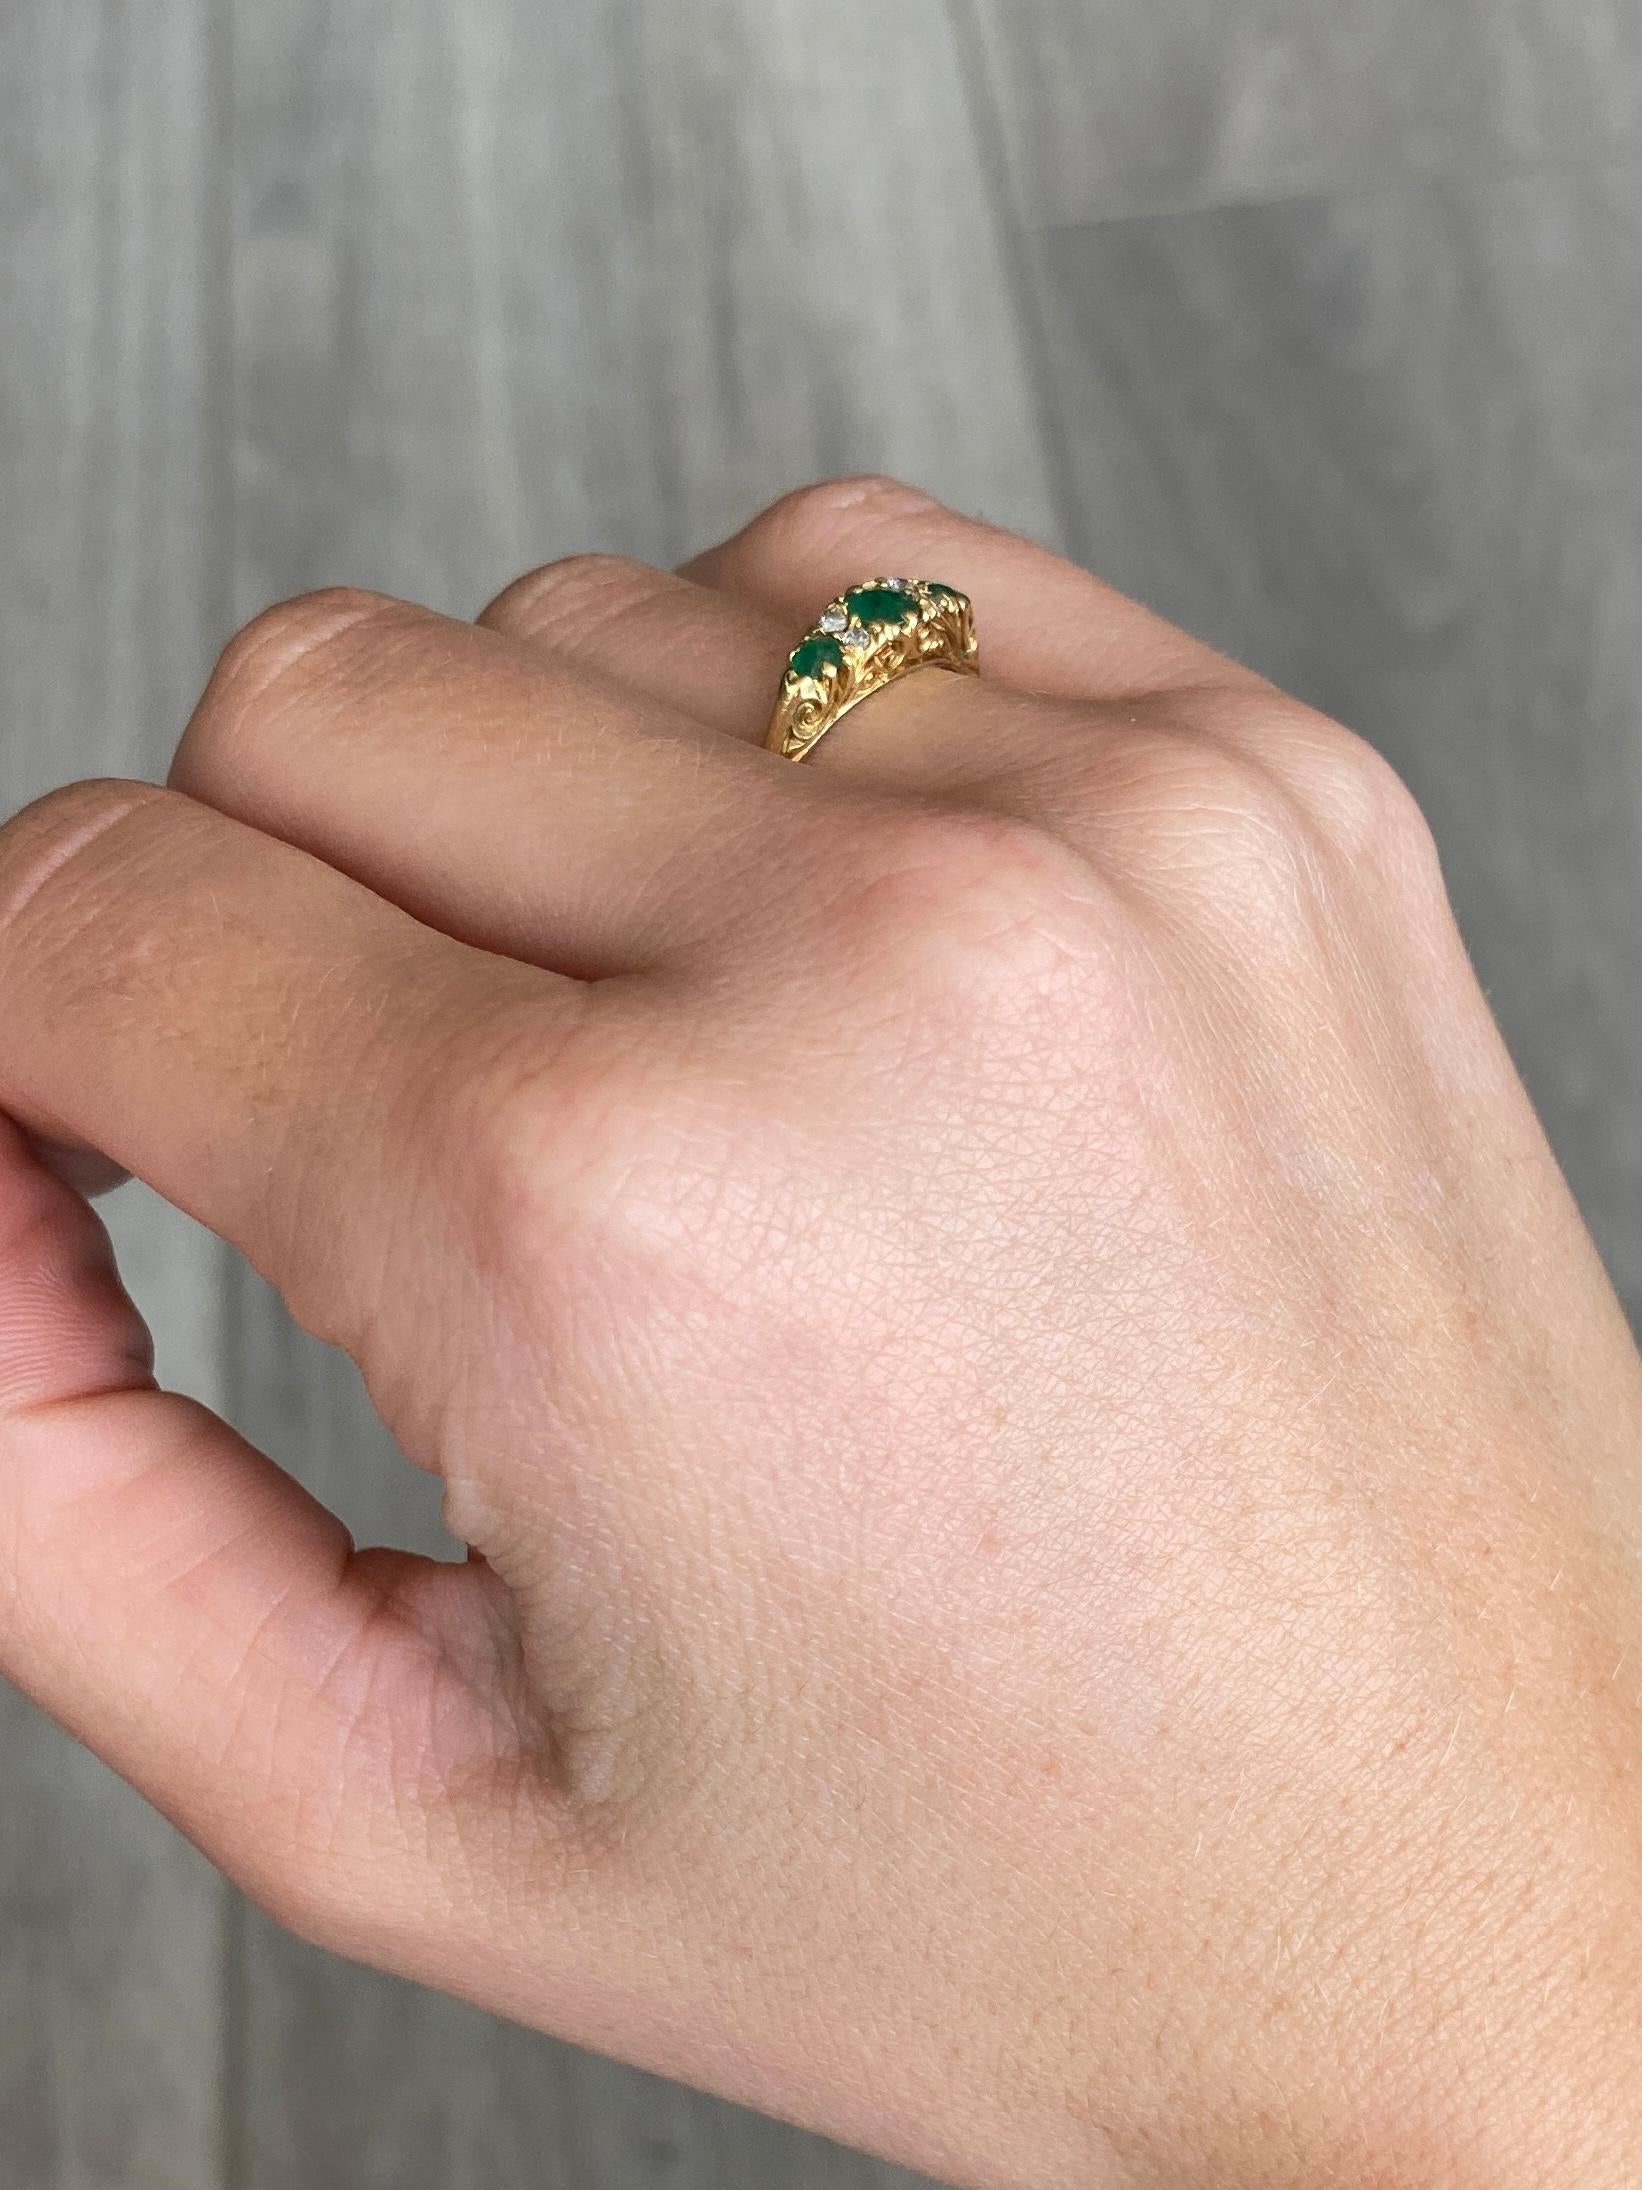 This gorgeous three stone holds three emeralds which total 50pts and in between them sit two pairs of diamonds totalling 10pts. The ring is modelled in 18ct.

Size: J or 4 3/4
Width: 5mm

Weight: 2.8g